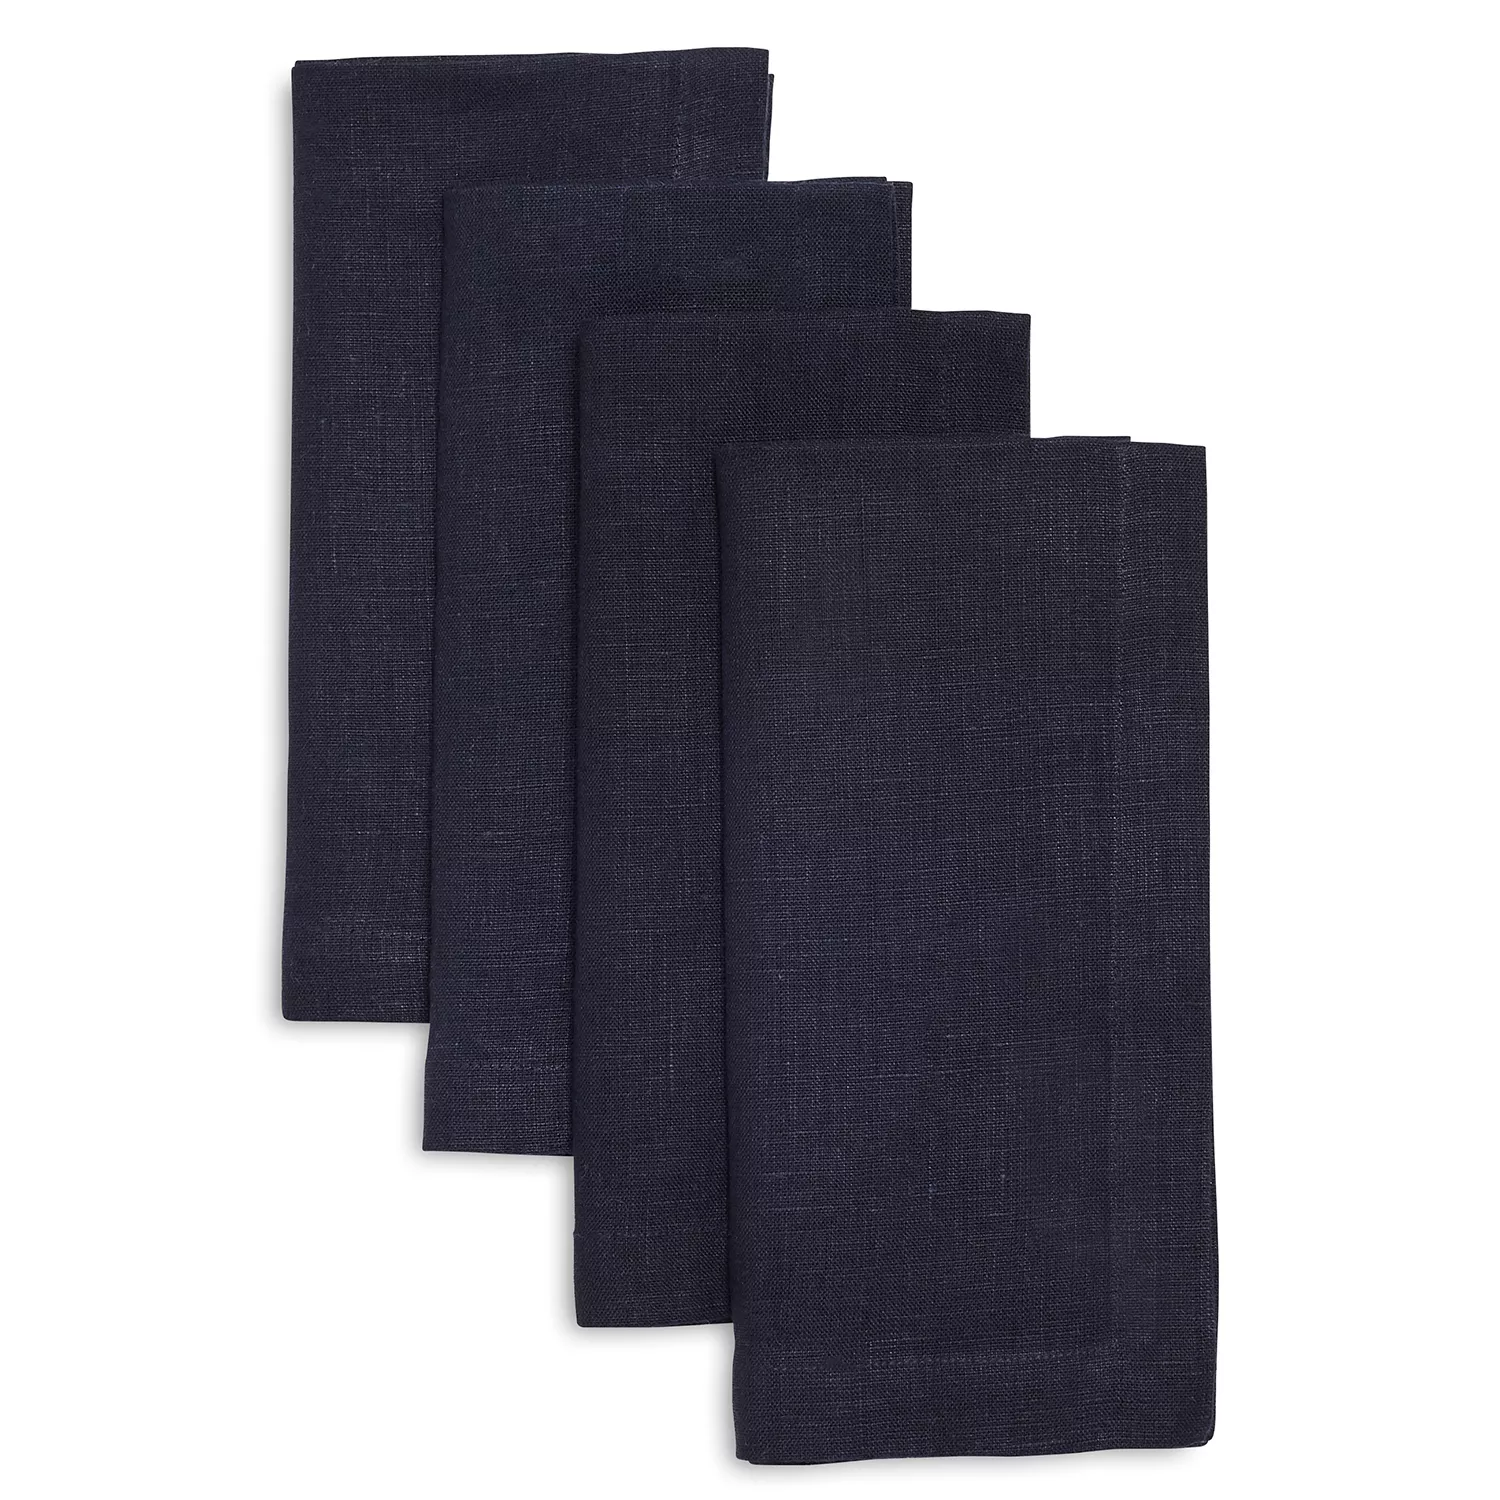 Herbs Floral Indigo Navy Blue Oven Mitts Pot Holders Sets Hot Pads